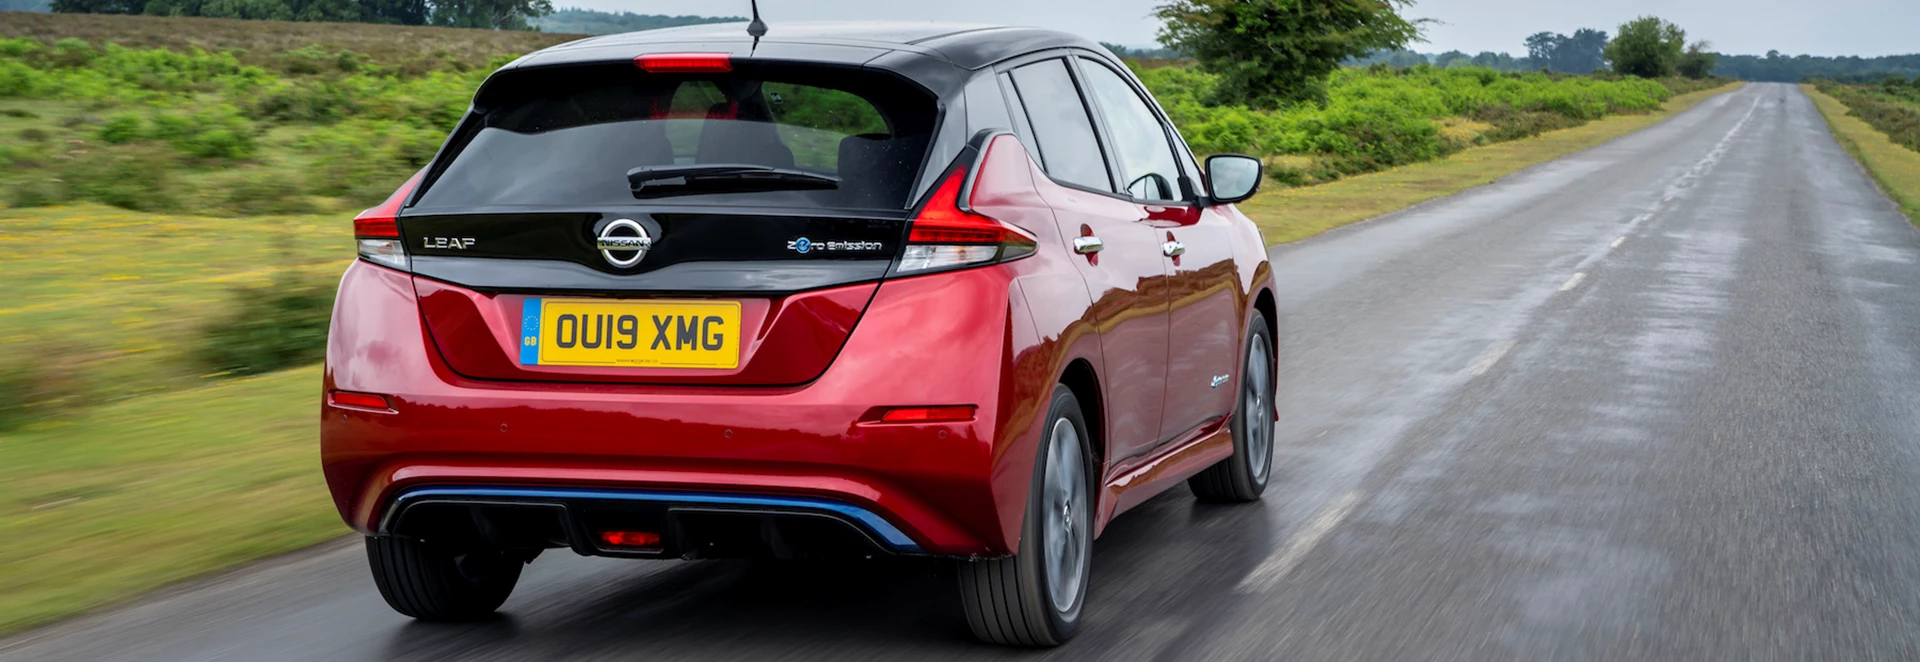 Buyer’s guide to the Nissan Leaf E+